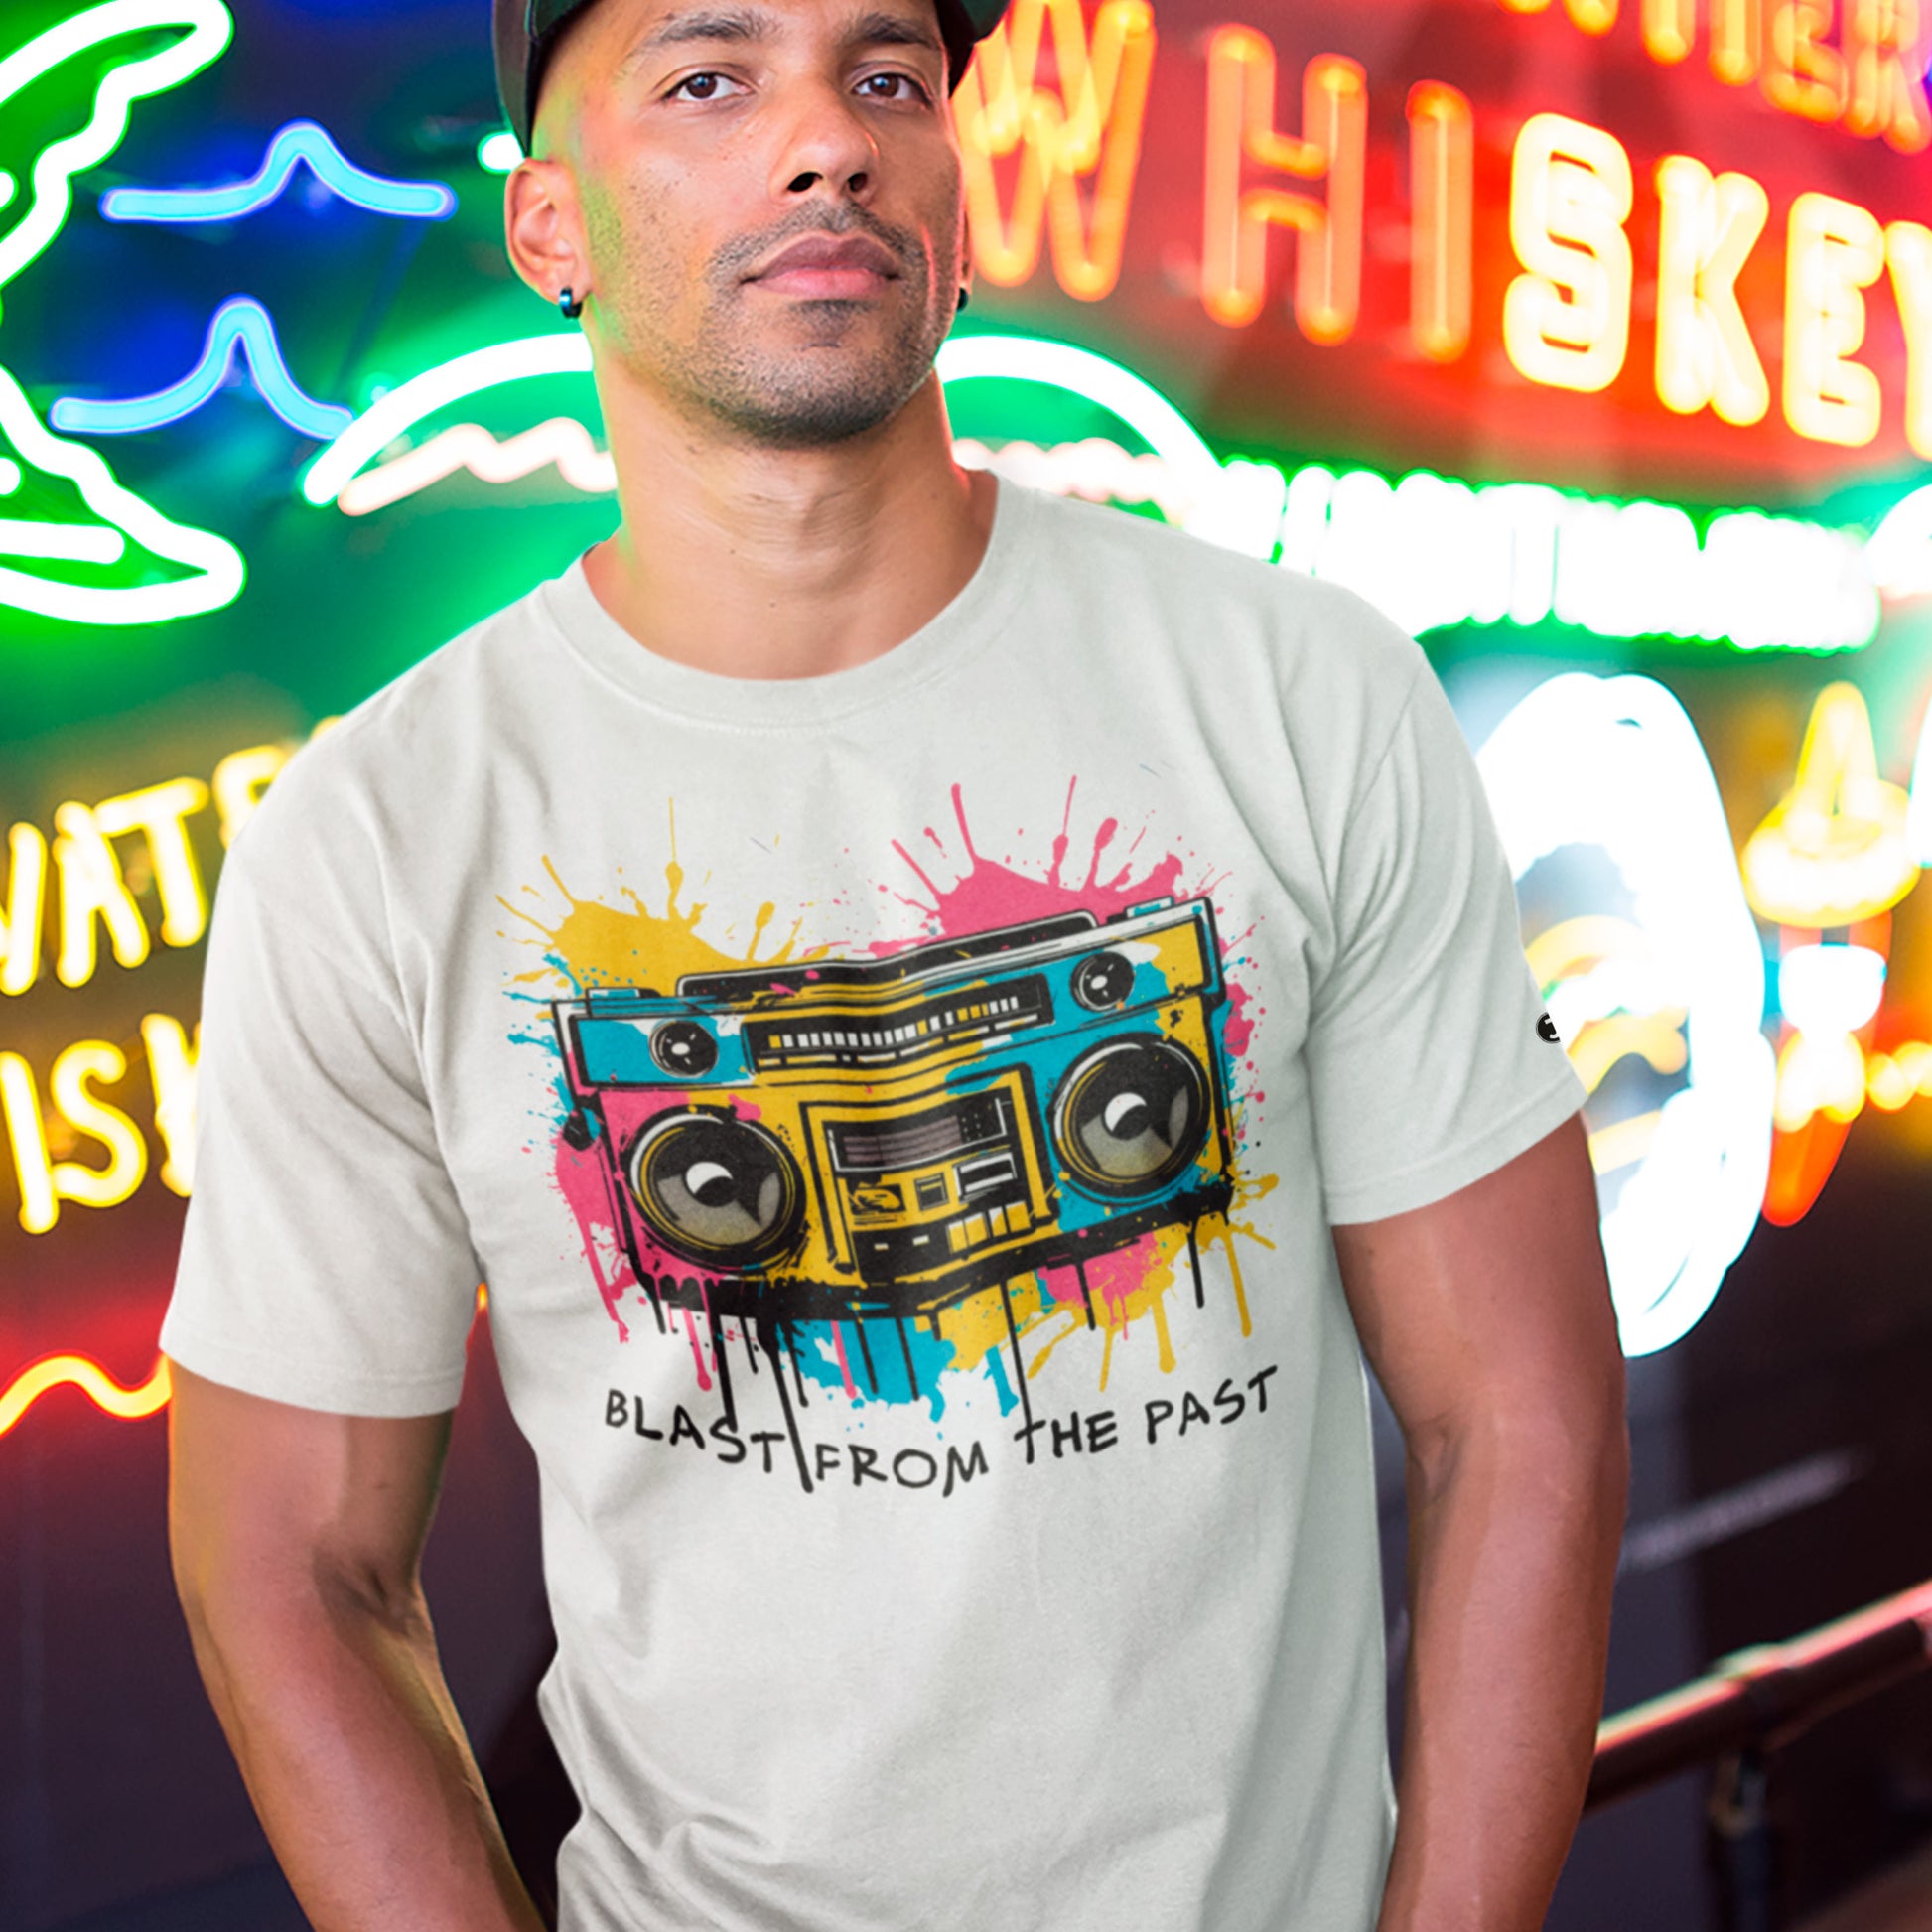 Blast From The Past Unisex organic cotton t-shirt- worn by male model